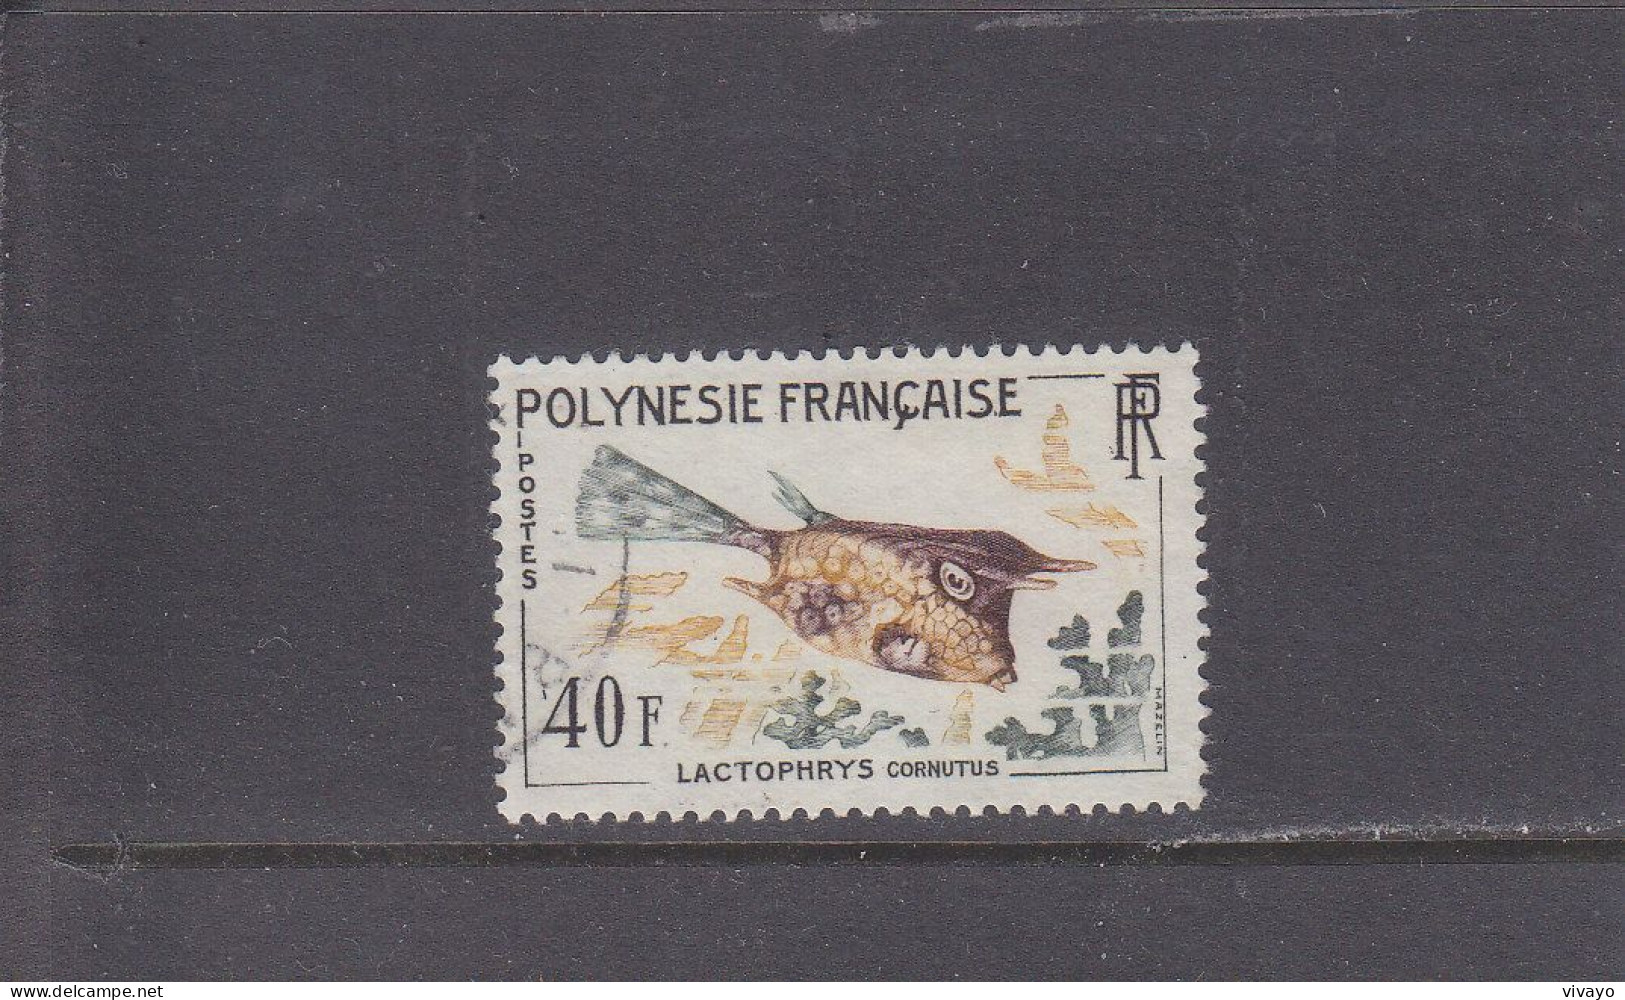 FRENCH POLYNESIA - POLYNESIE FRAN. - O / FINE CANCELLED - 1962 - TROPICAL FISH (TOP VALUE) - Yv. 21 - Mi. 27 - Used Stamps